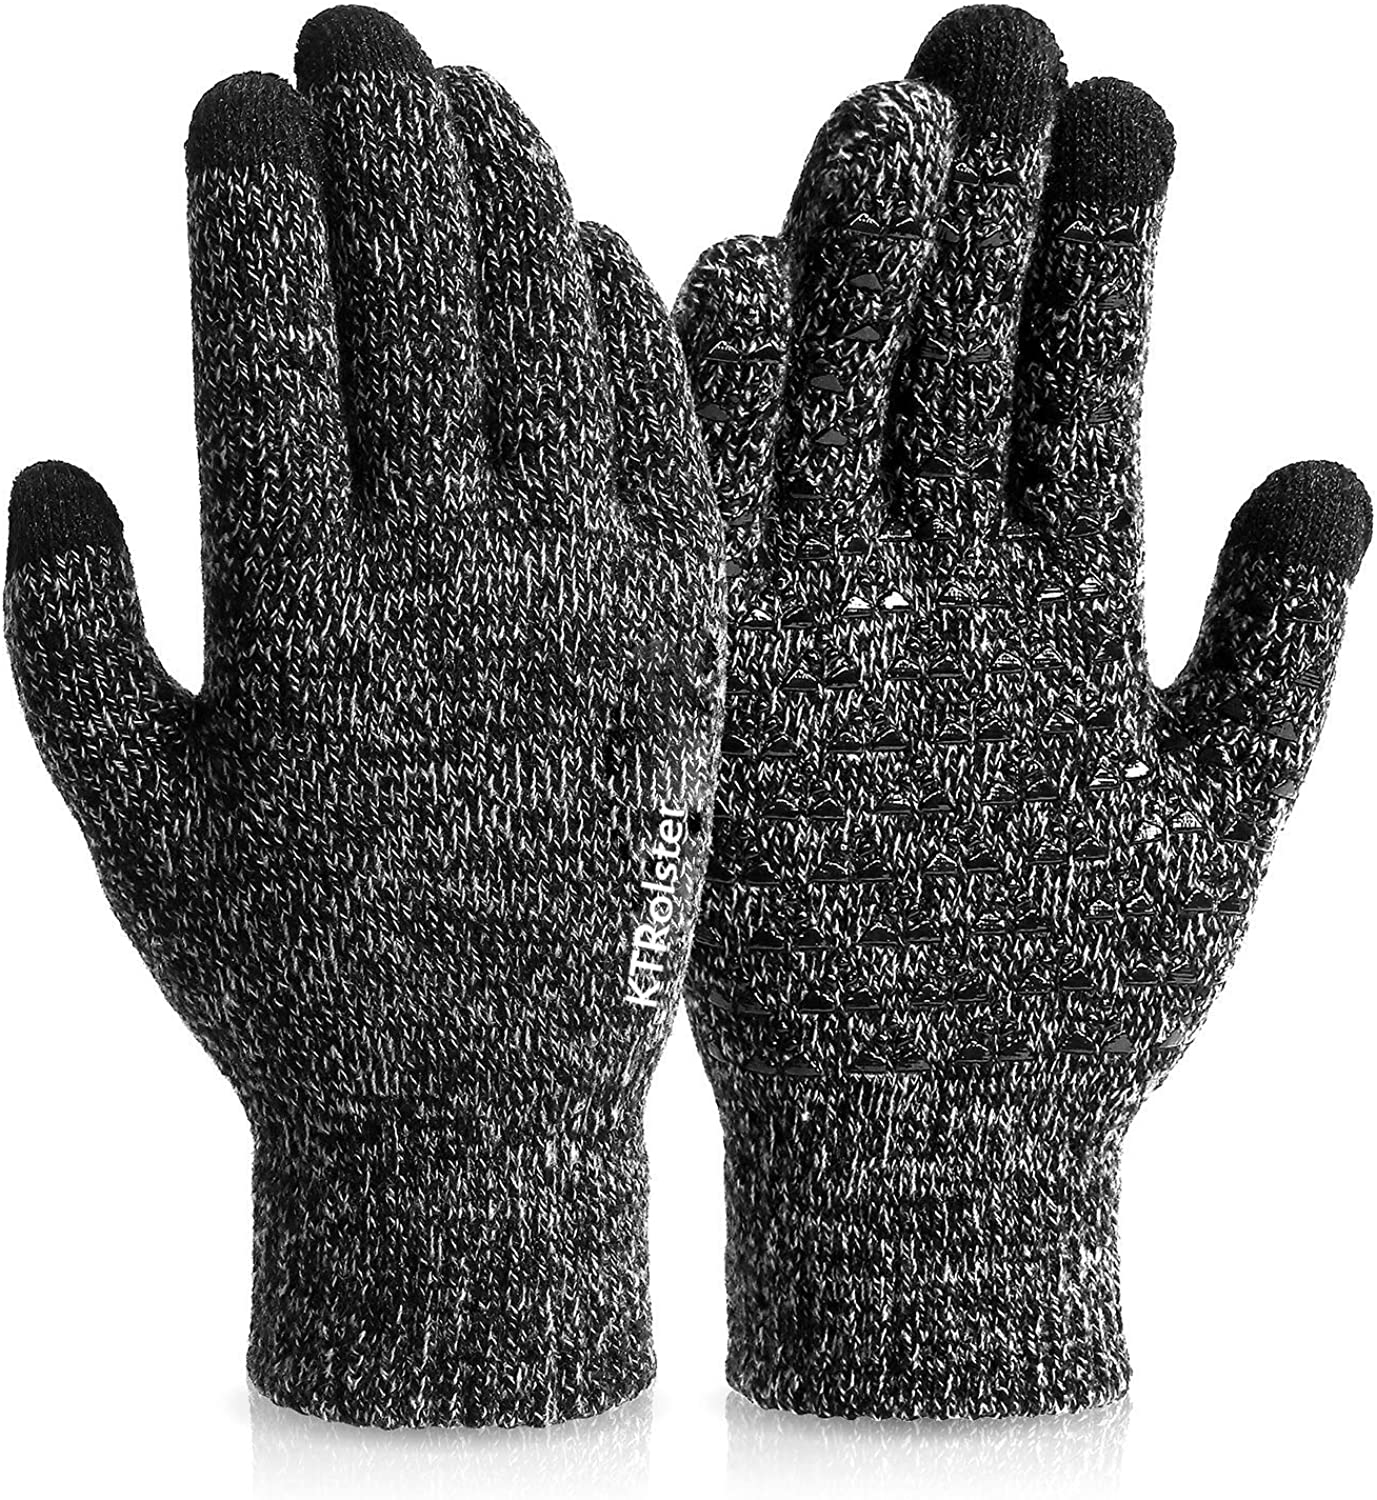 Winter Knit Gloves for,Touchscreen Gloves,Knit Wool,Anti-Slip Silicone Gel